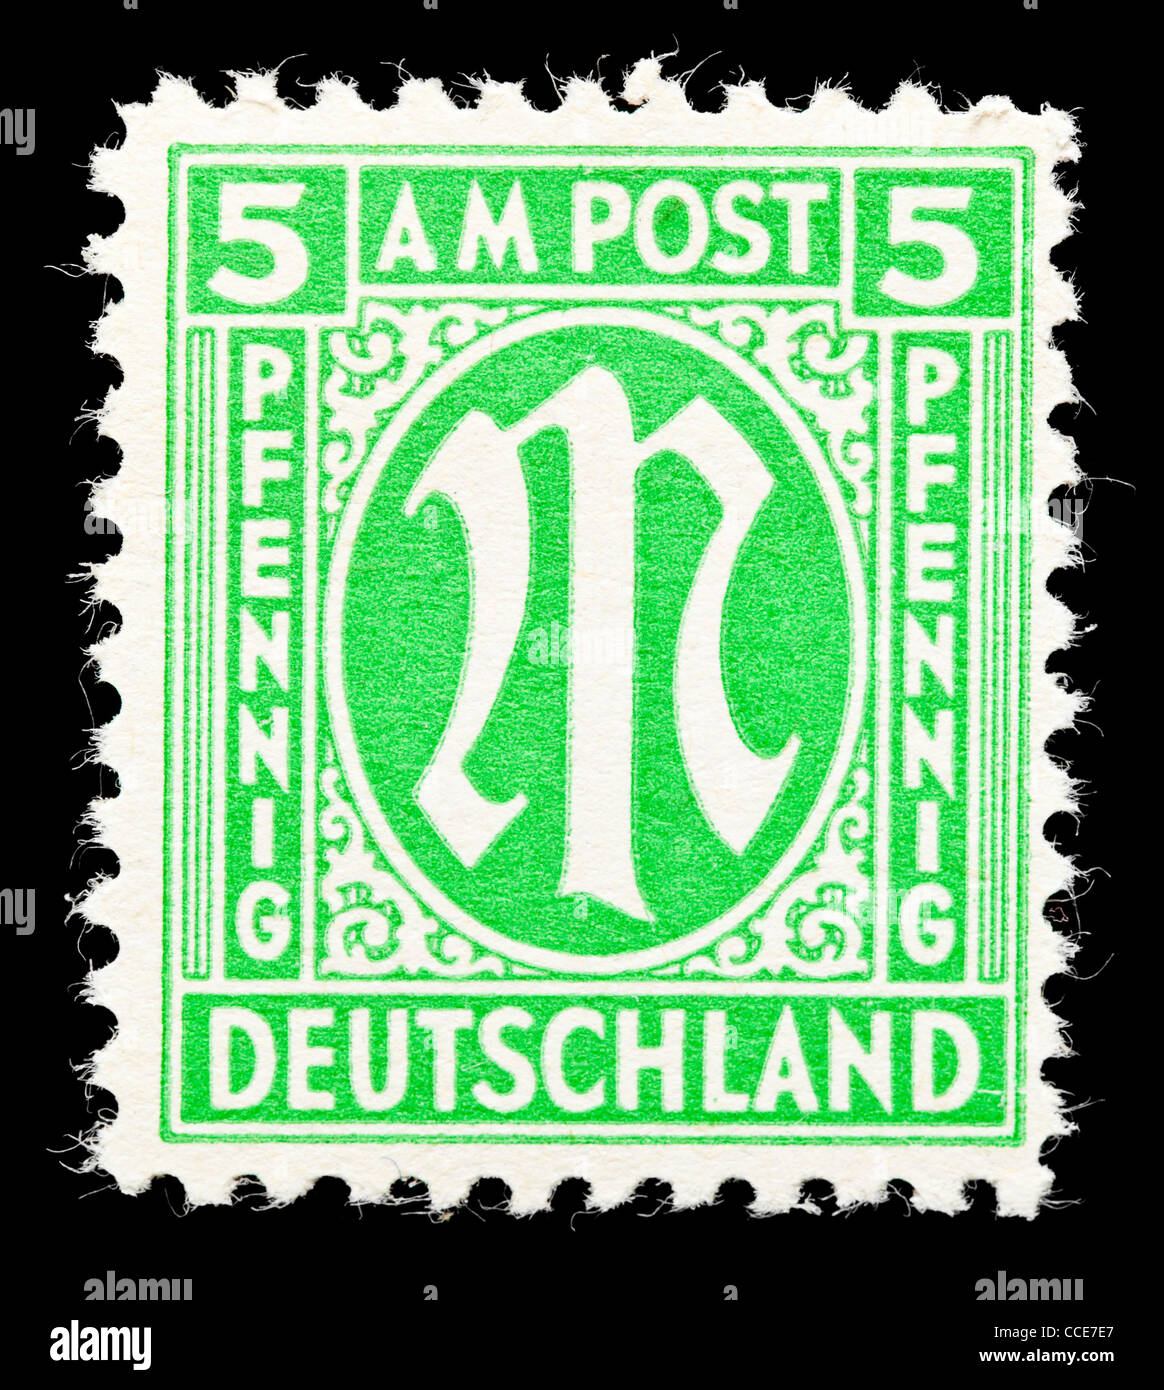 Postage stamp: Germany, AM Post, 1945, 5 Pfennig, mint condition Stock  Photo - Alamy